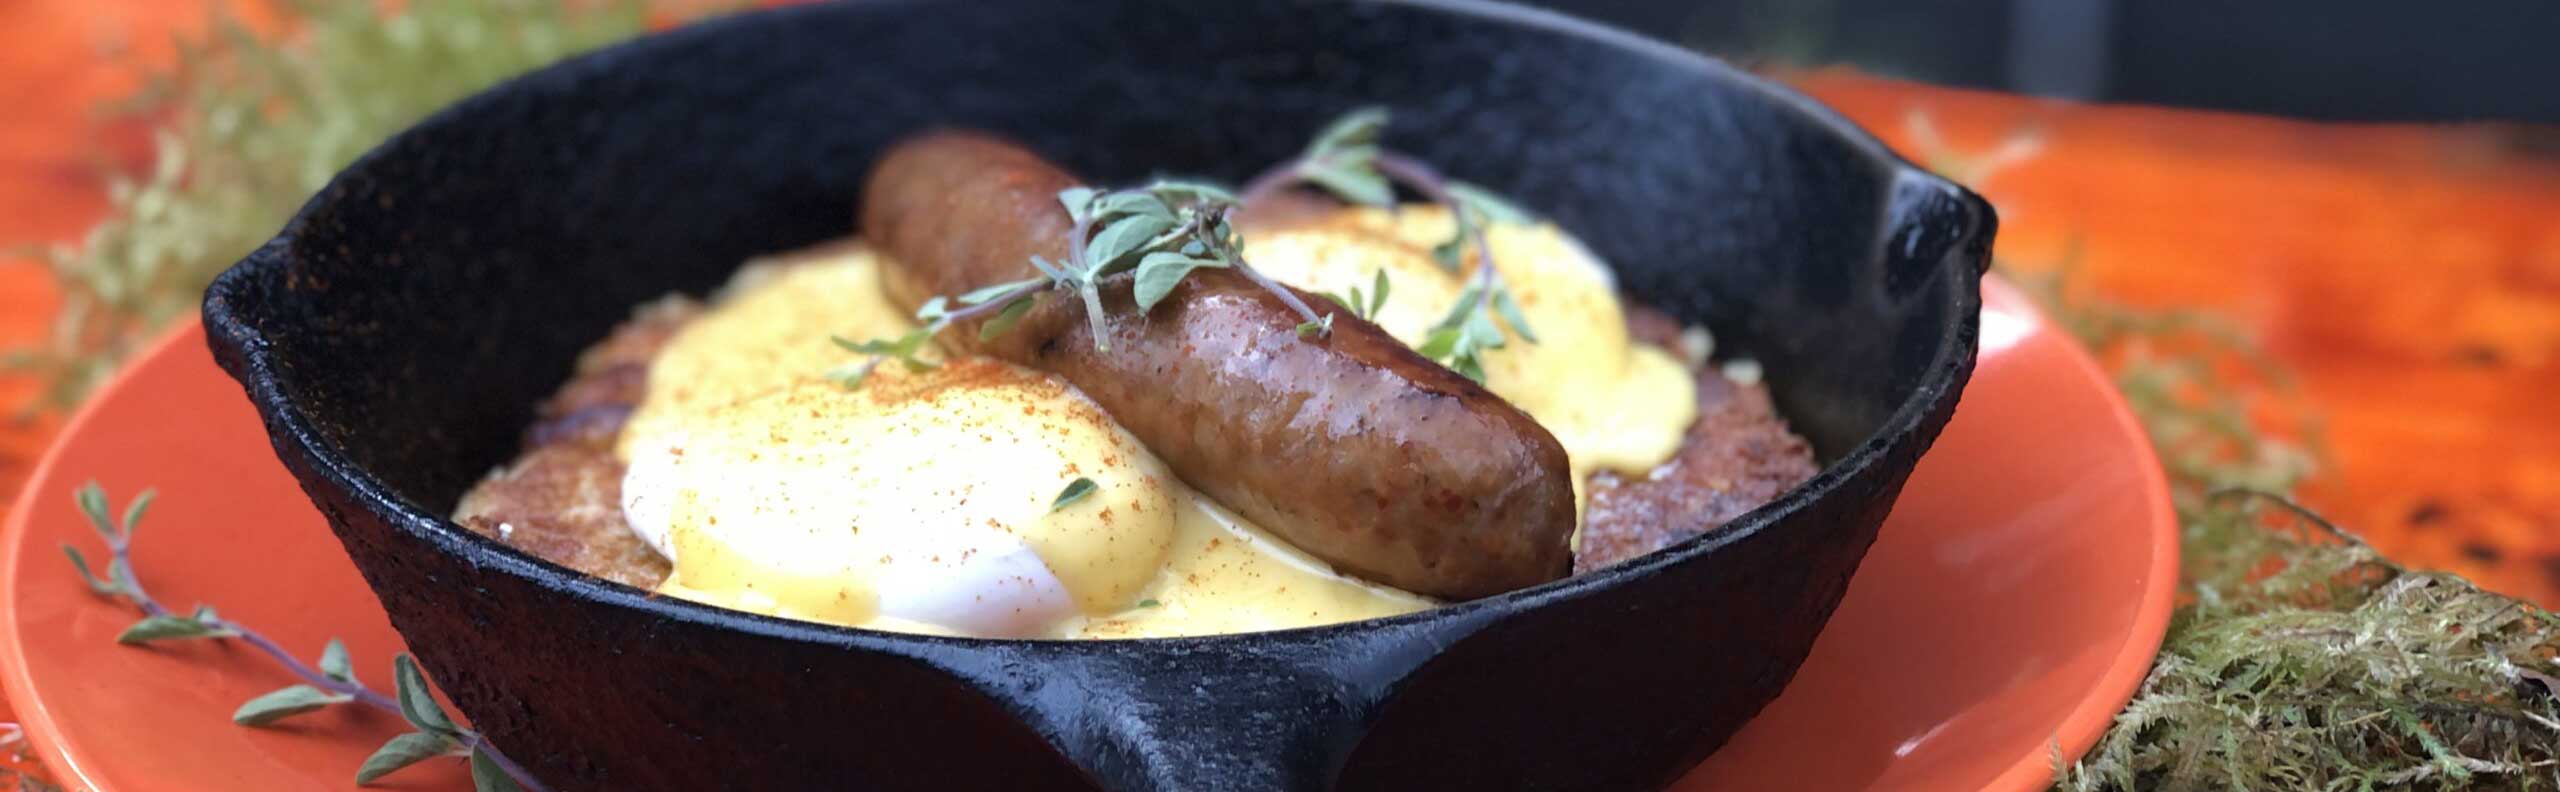 A sausage and eggs in a pan with herbs.